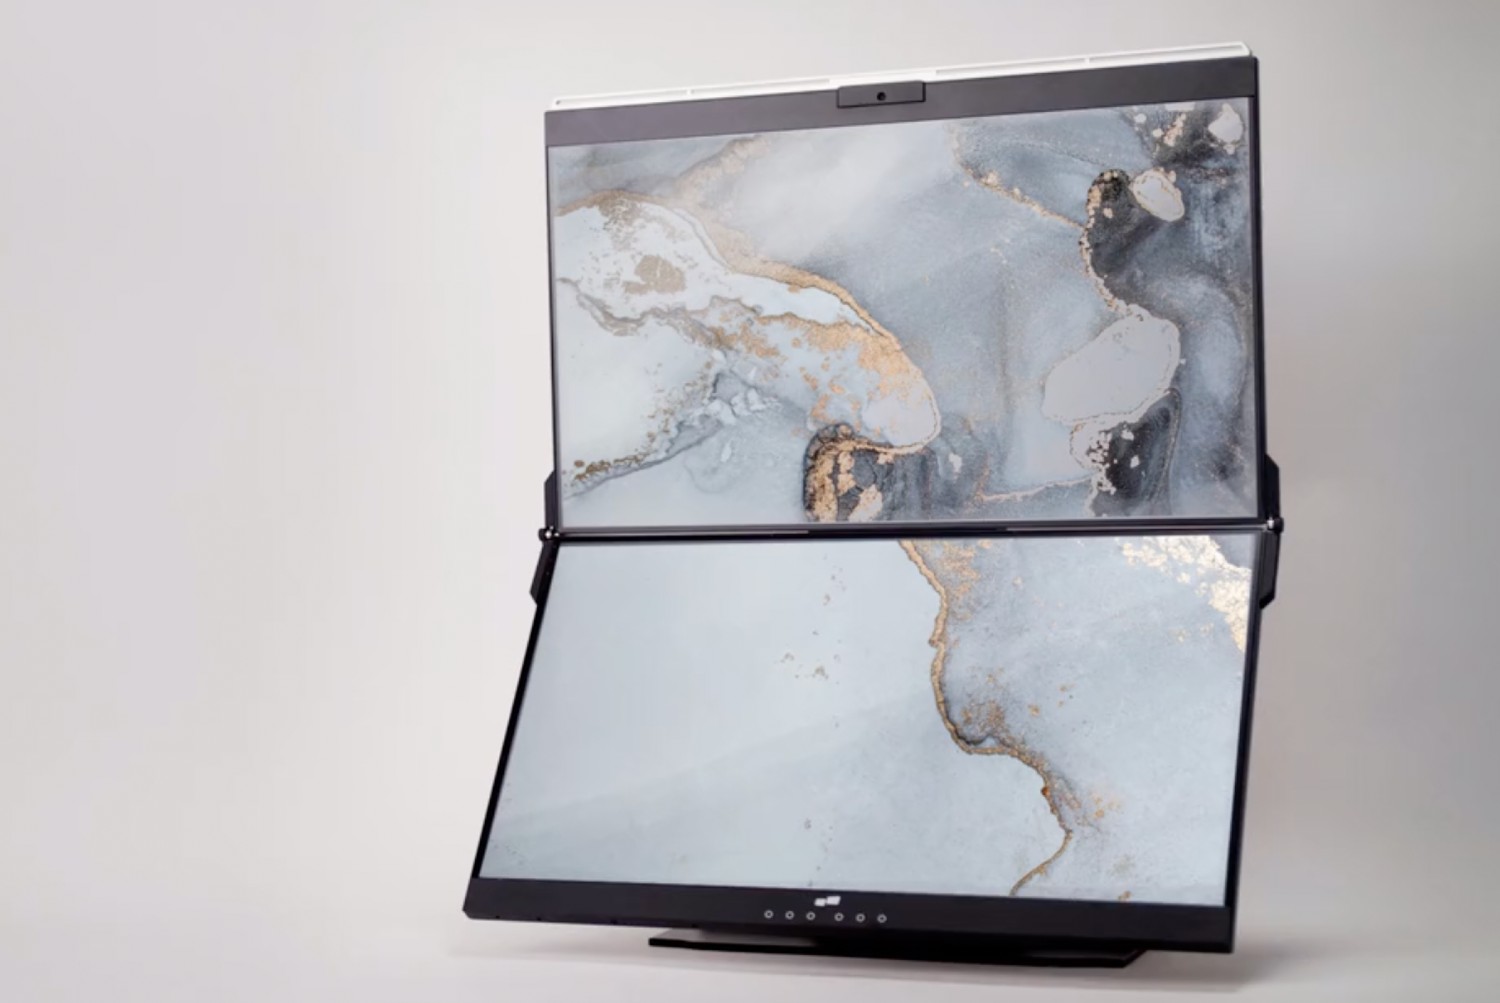 The Geminos dual screen monitor, open with both panels showing.